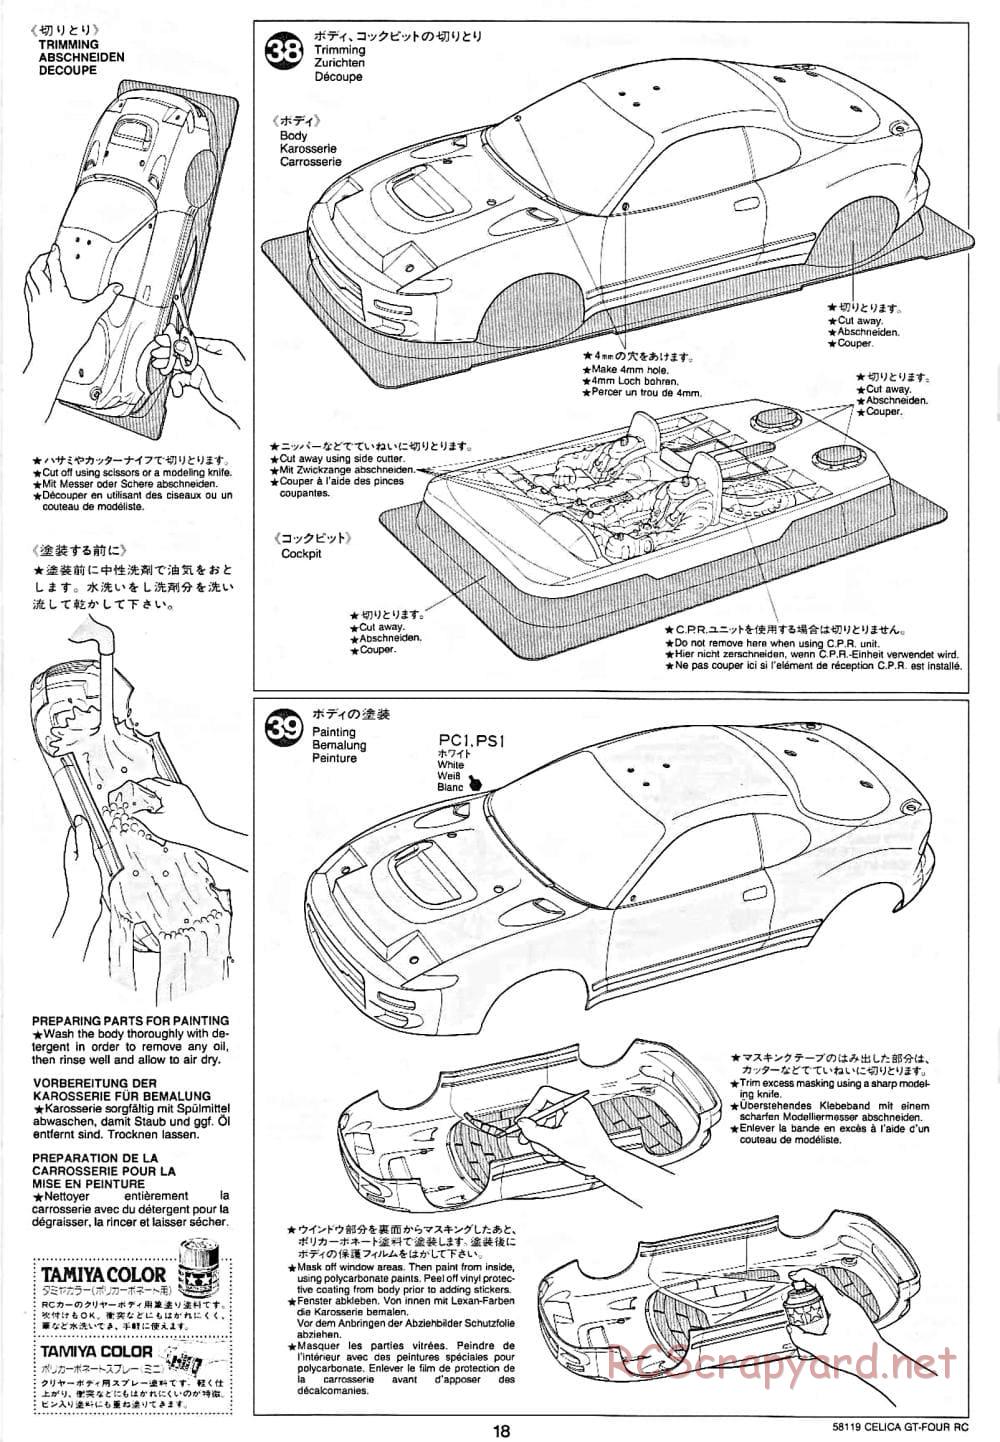 Tamiya - Toyota Celica GT-Four RC - TA-01 Chassis - Manual - Page 18